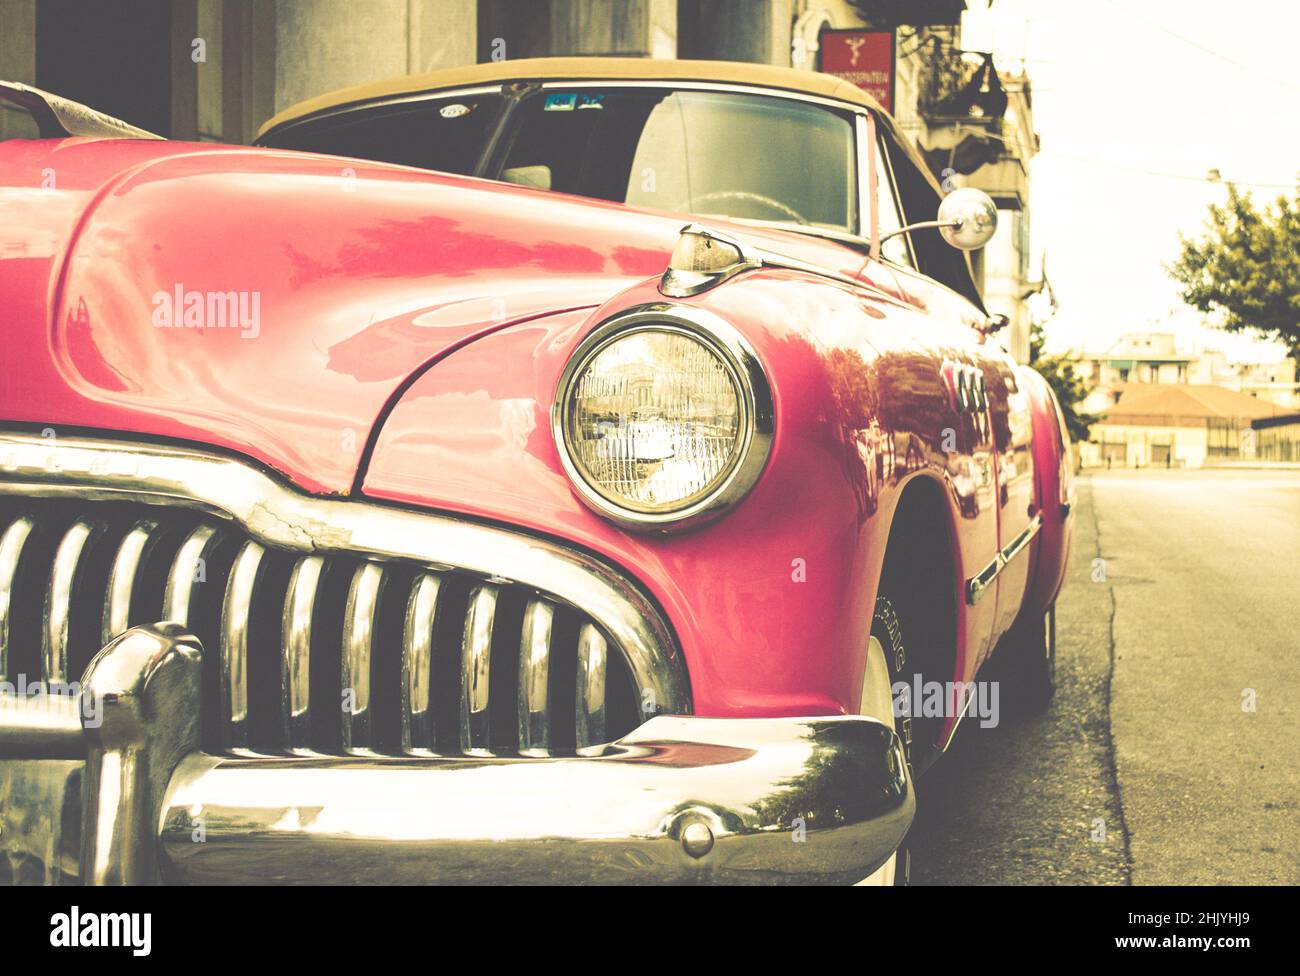 Pink Vintage Antique Car. Buick Super Convertible Sedan Parked Aside the Road in an Old Neighborhood of Patras, Greece. Retro Style Photography Stock Photo